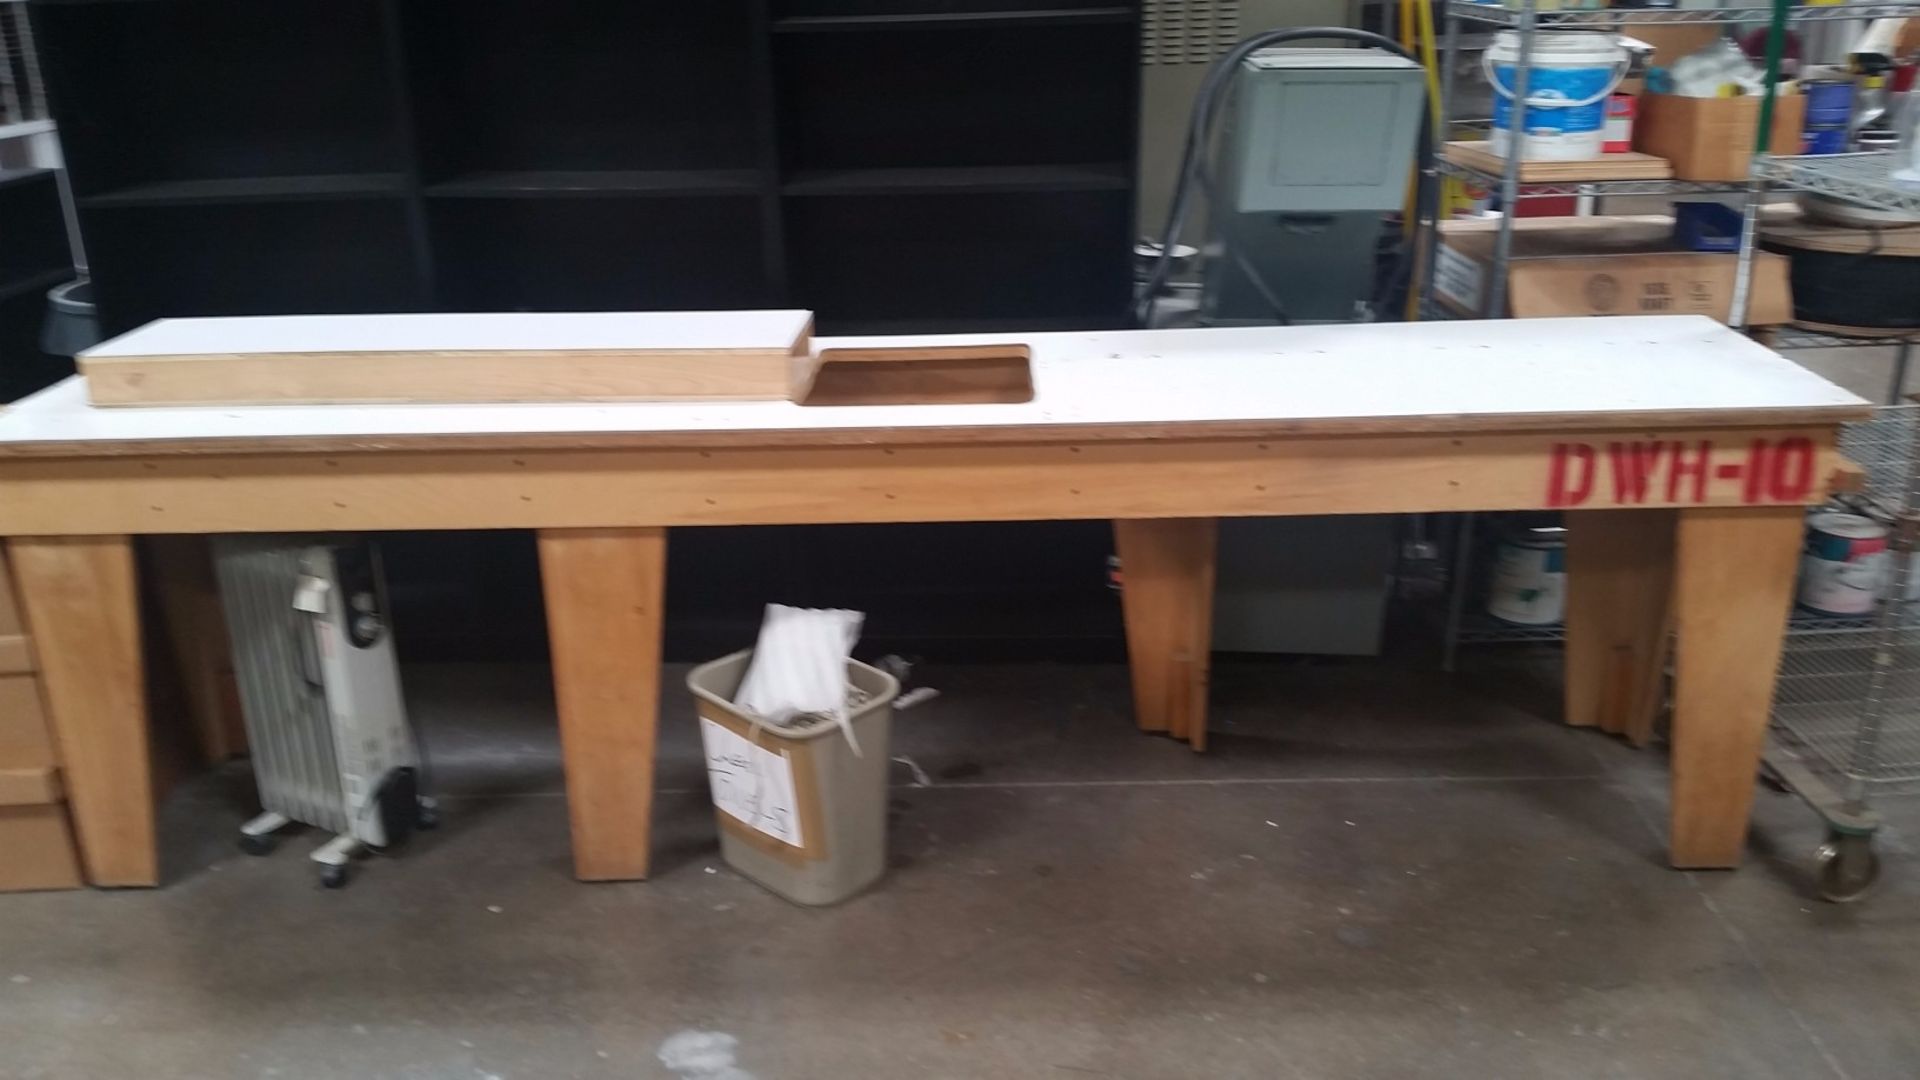 Saw Work Table ,1 USED CHOP SAW /TABLE SAW WORK BENCH 121 1/2" X 26" X 34" (INSERT FOR SAW 16" " X - Image 6 of 6